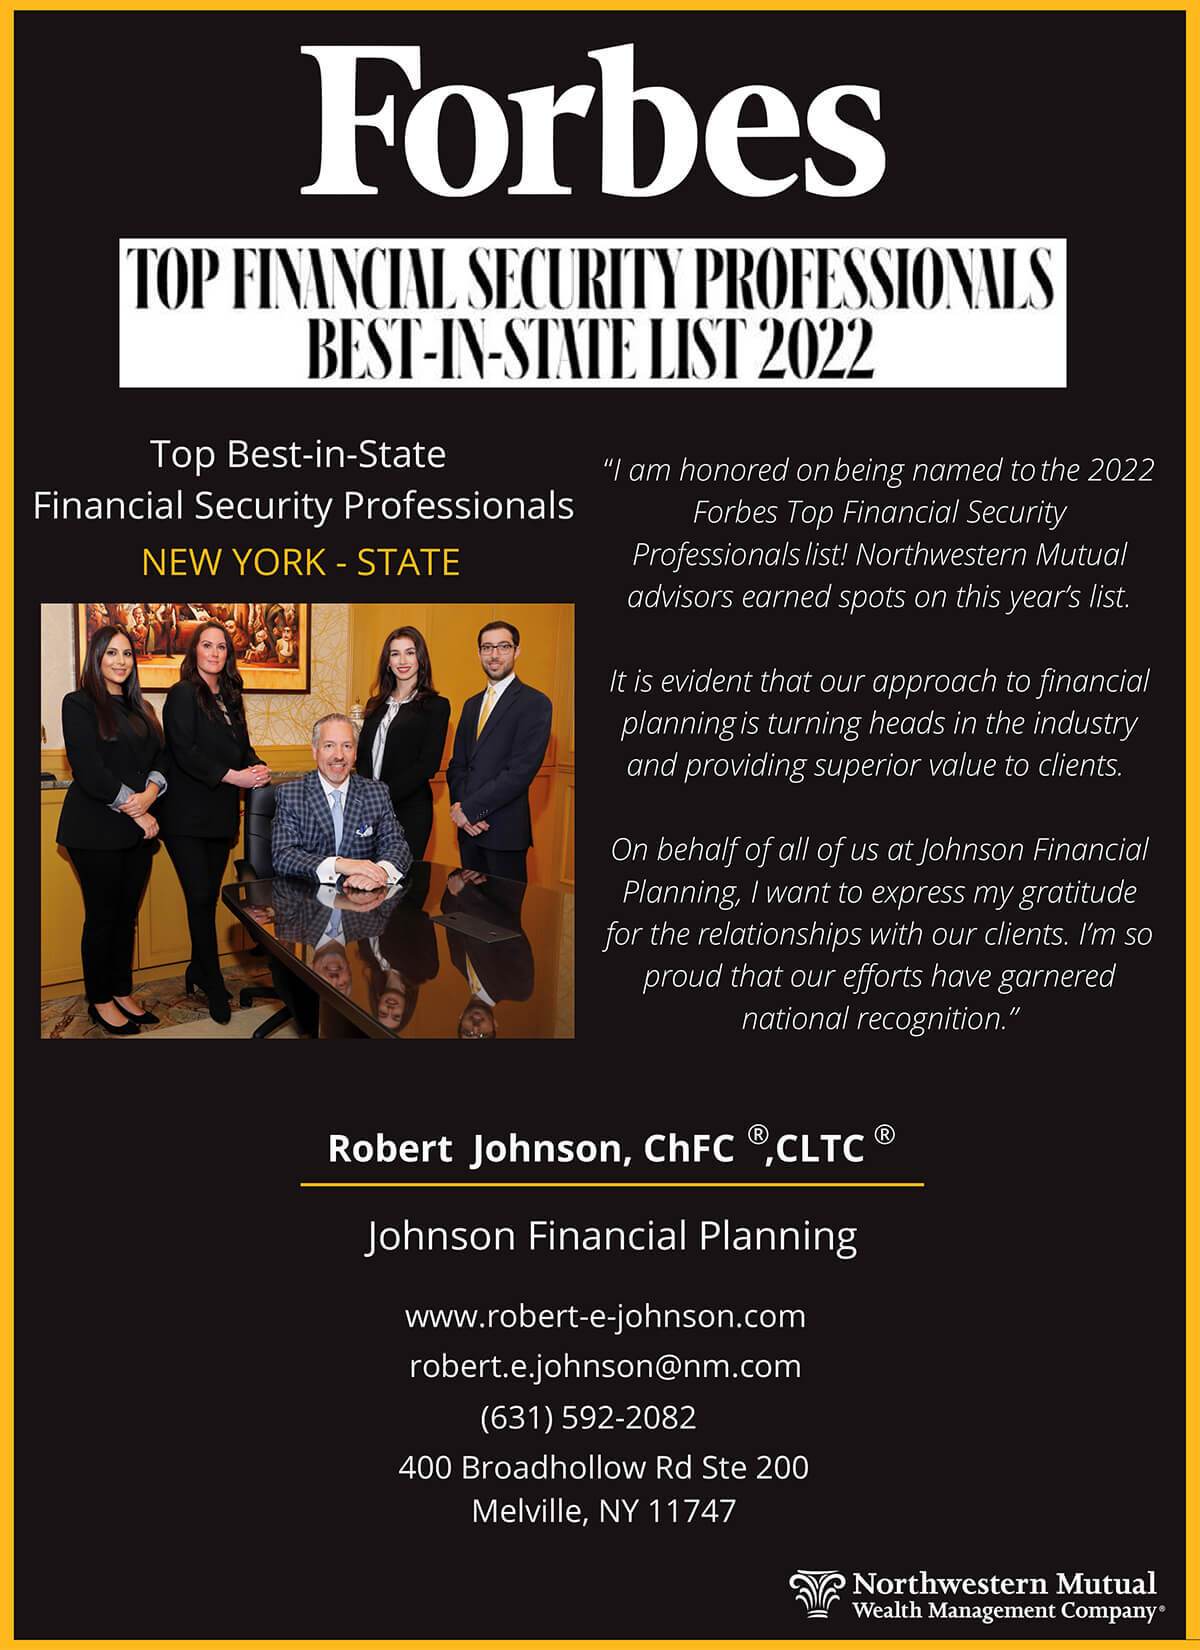 Forbes Top Financial Security Professionals Best-in-State List 2022